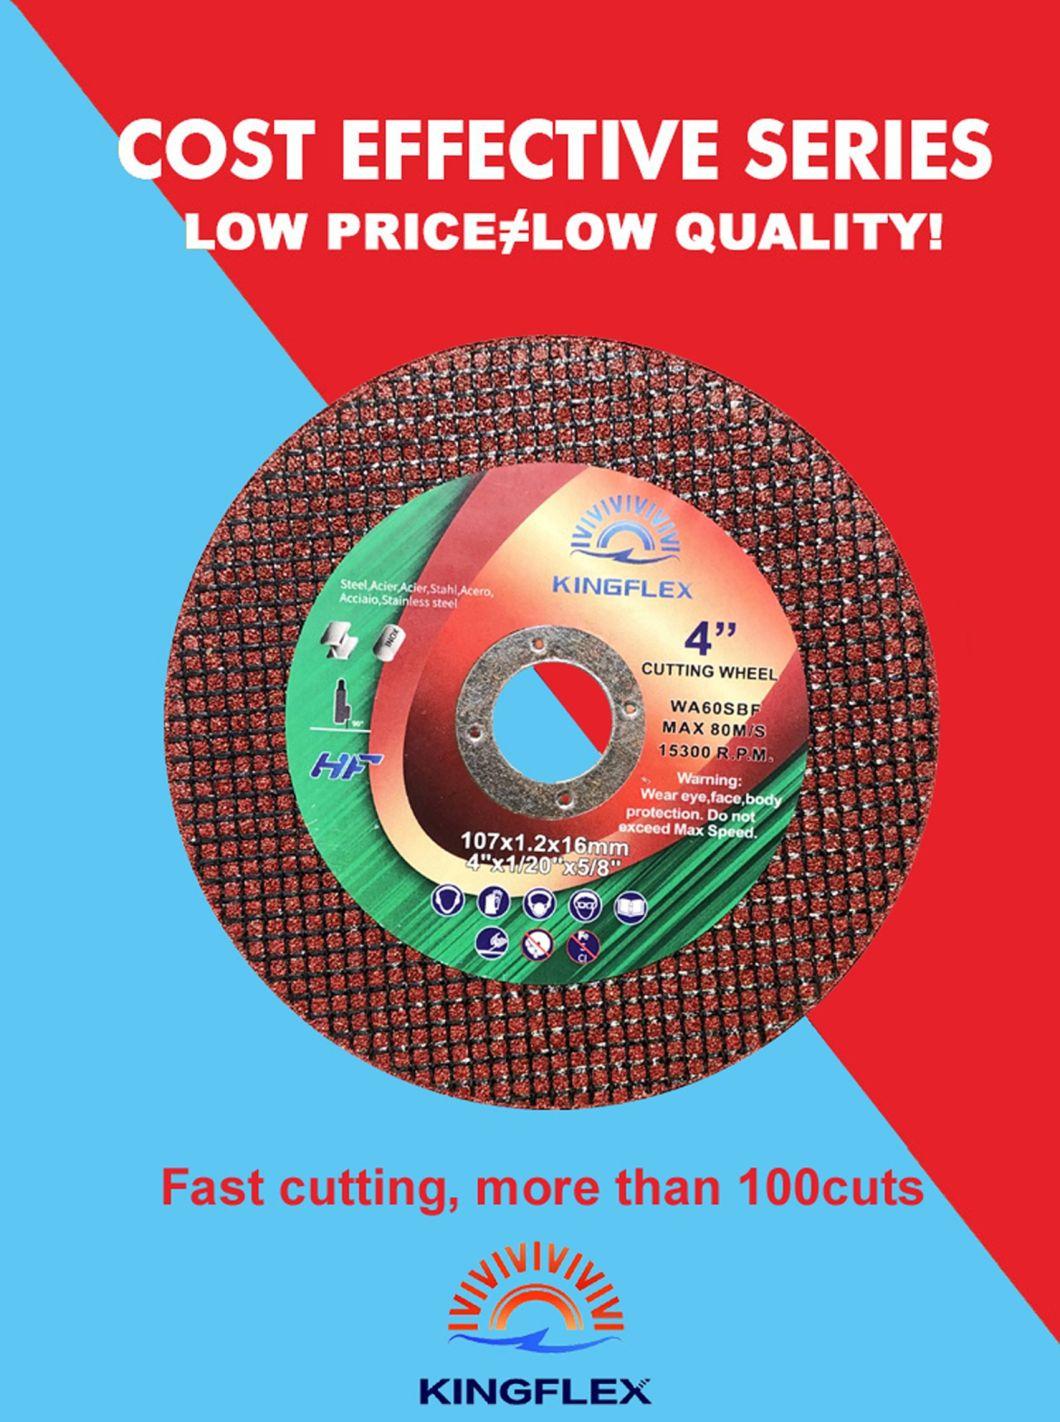 Super Thin Cutting Disc, 4X1, 2nets Brown, Special for Inox and Stainless Steel